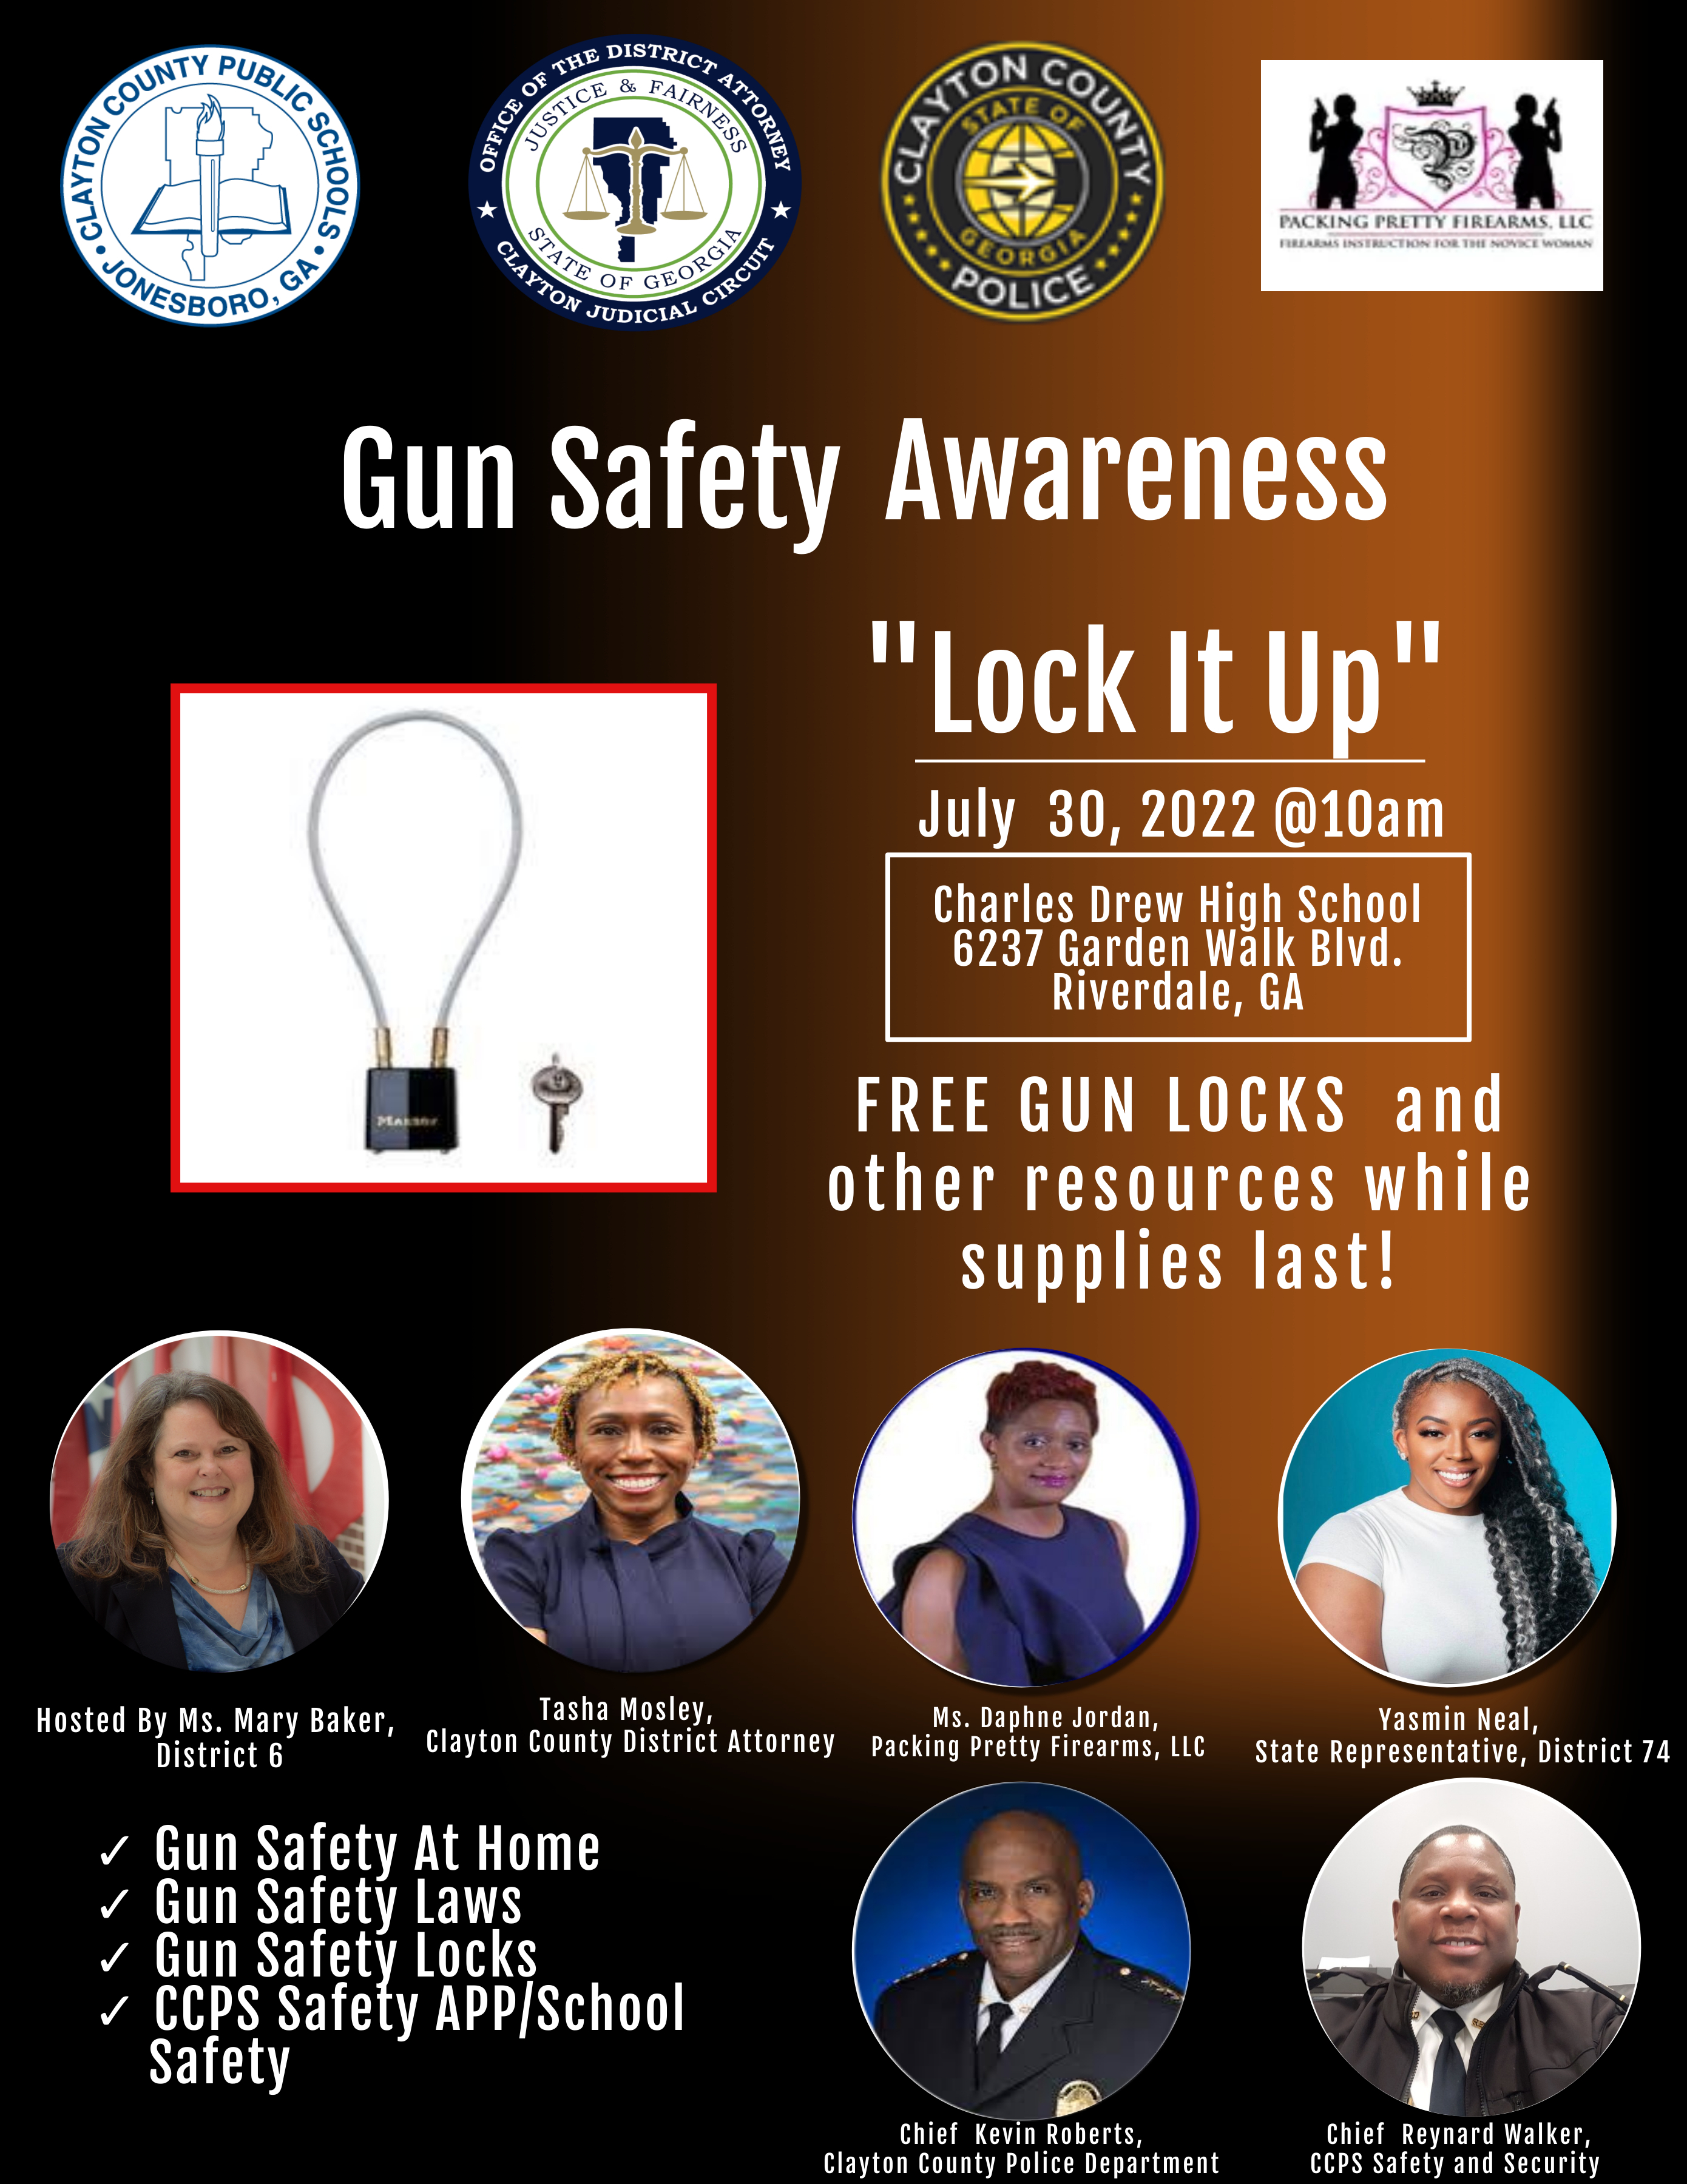 This is the image for the news article titled Gun Safety Awareness: Lock It Up!